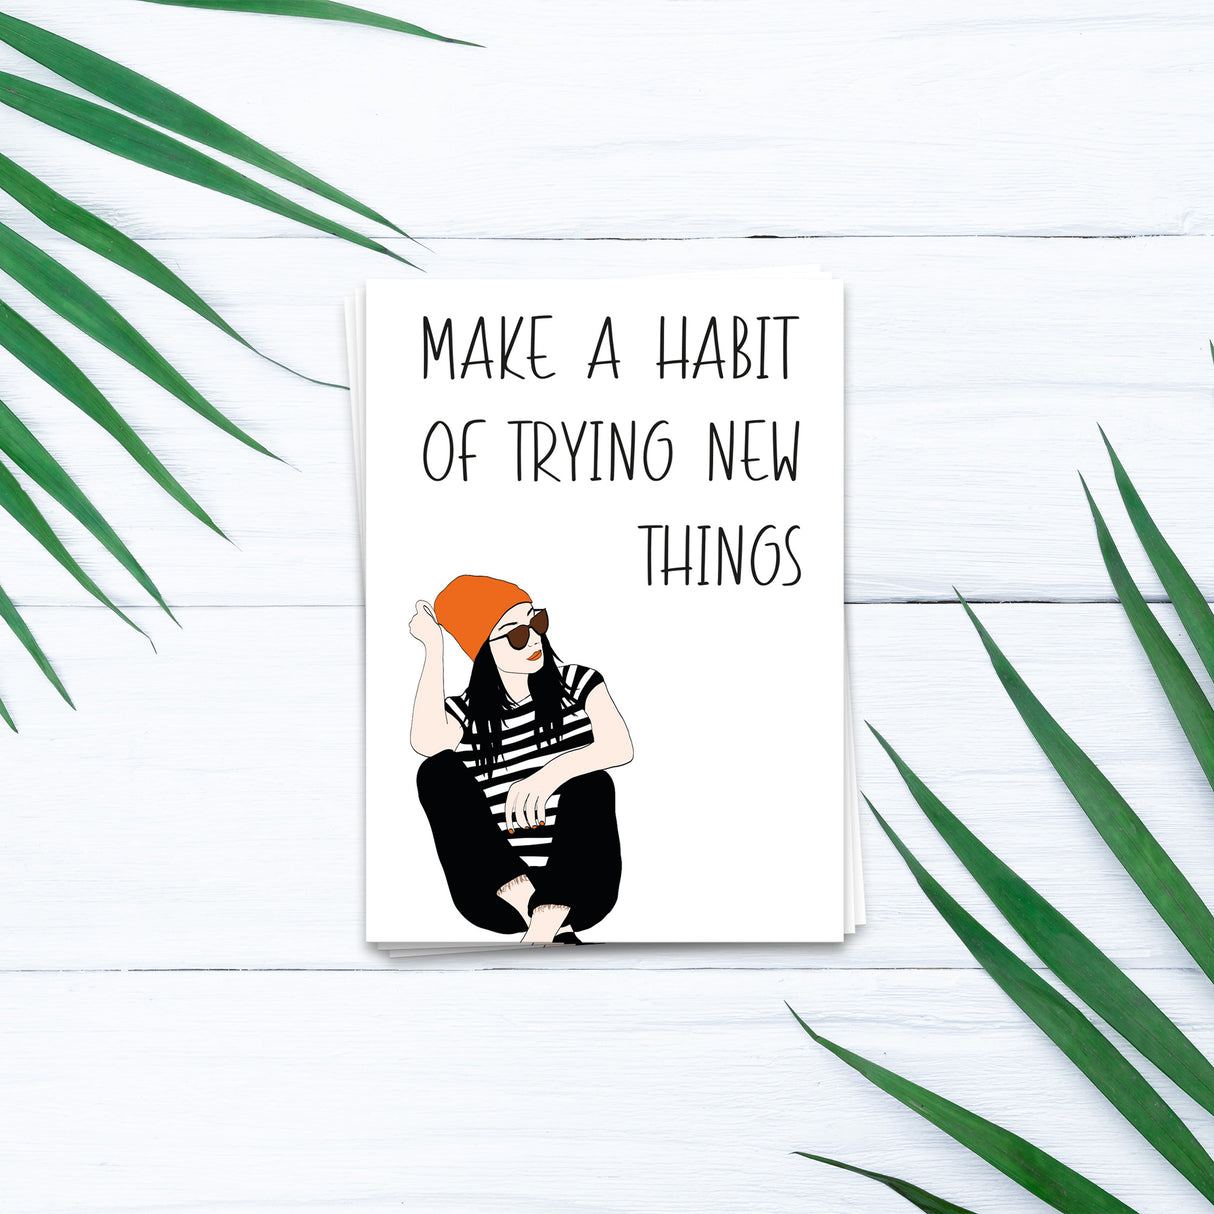 Make a habit of trying new things - Postkarte